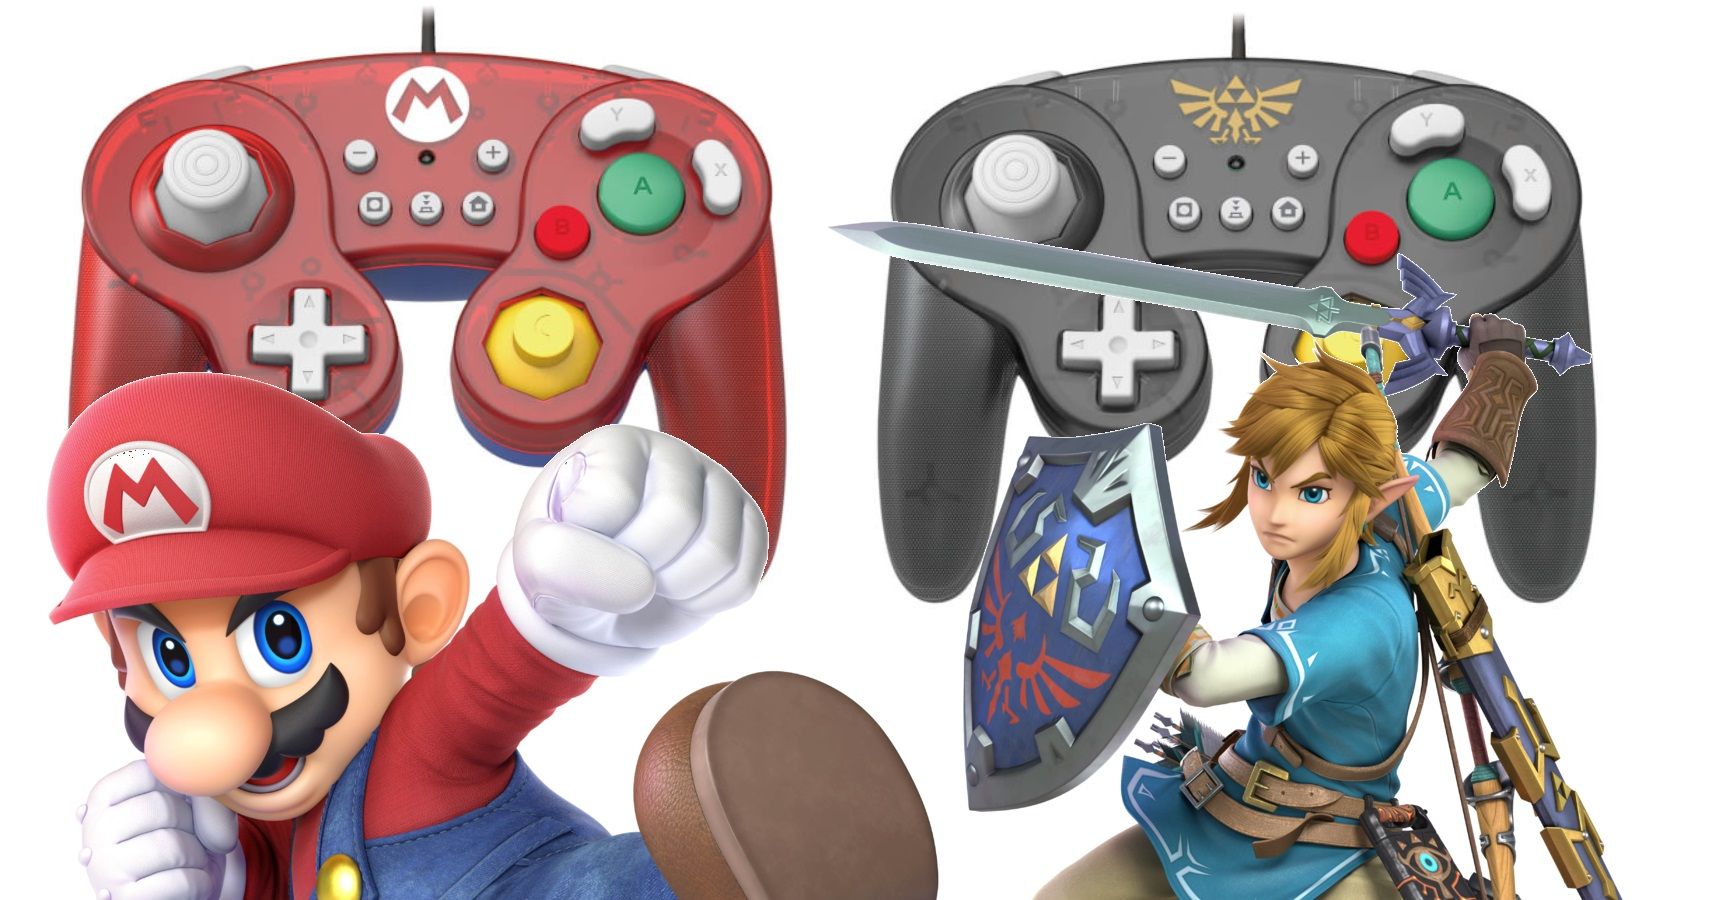 Get GameCube Switch Bundle Mario And Link Ultimate Controllers Bros. New With Smash